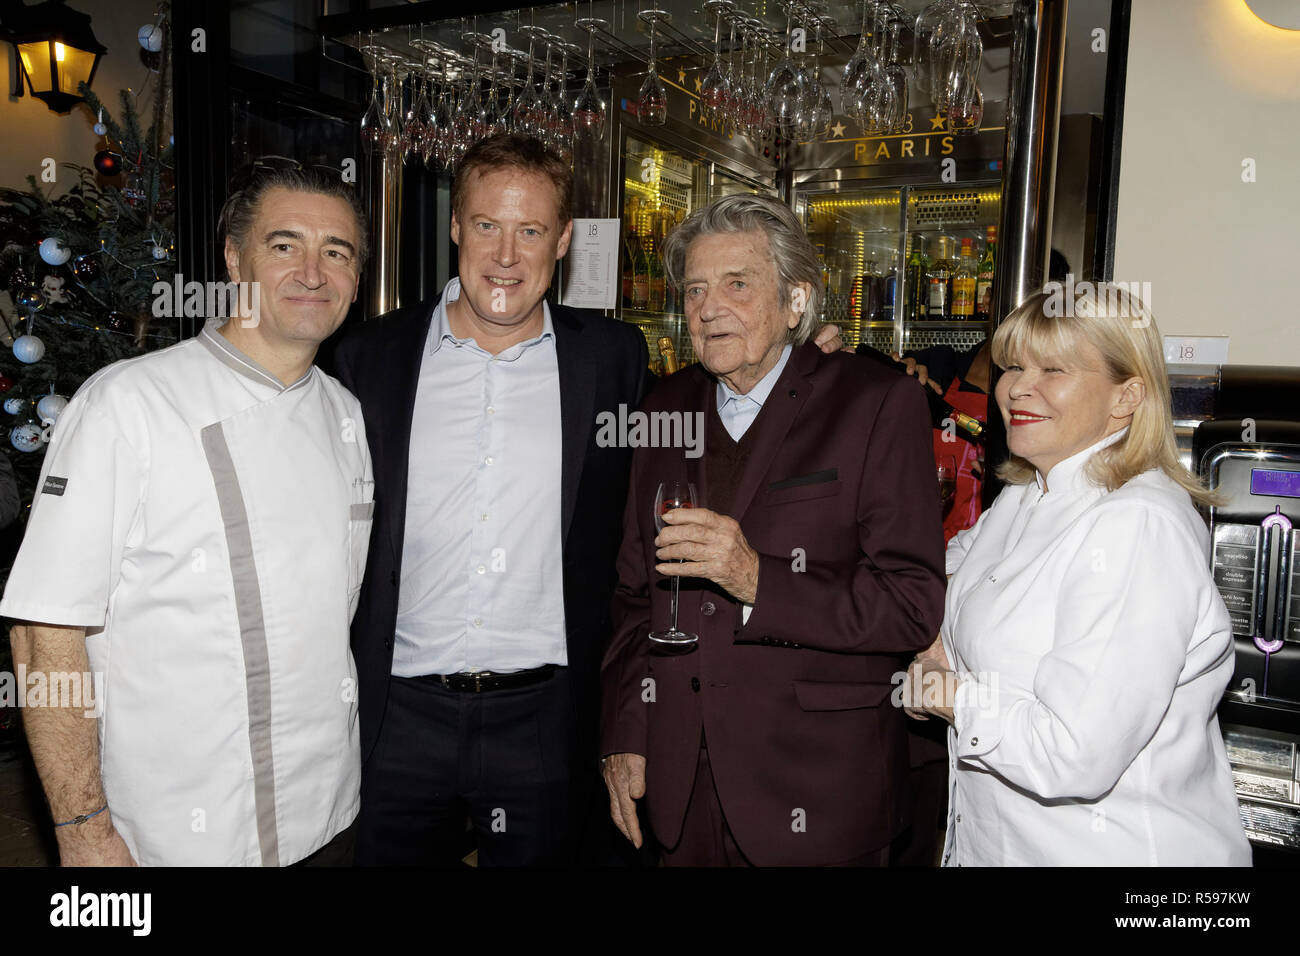 Paris, France. 29th Nov, 2018. Chef Jean-Pierre Jacquin, Thomas Chaumette, Film-maker Jean-Pierre Mocky and Chef Ghislaine Arabian - Jean-Eric Duluc, President of the International Federation of Tourism awarded the 2018 Lauriers d'or of Excellence International Hotel Tourism to Thomas Chaumette, of Best Western Hotel Le 18 Paris, on November 29, 2018. Credit: Bernard Menigault/Alamy Live News Stock Photo